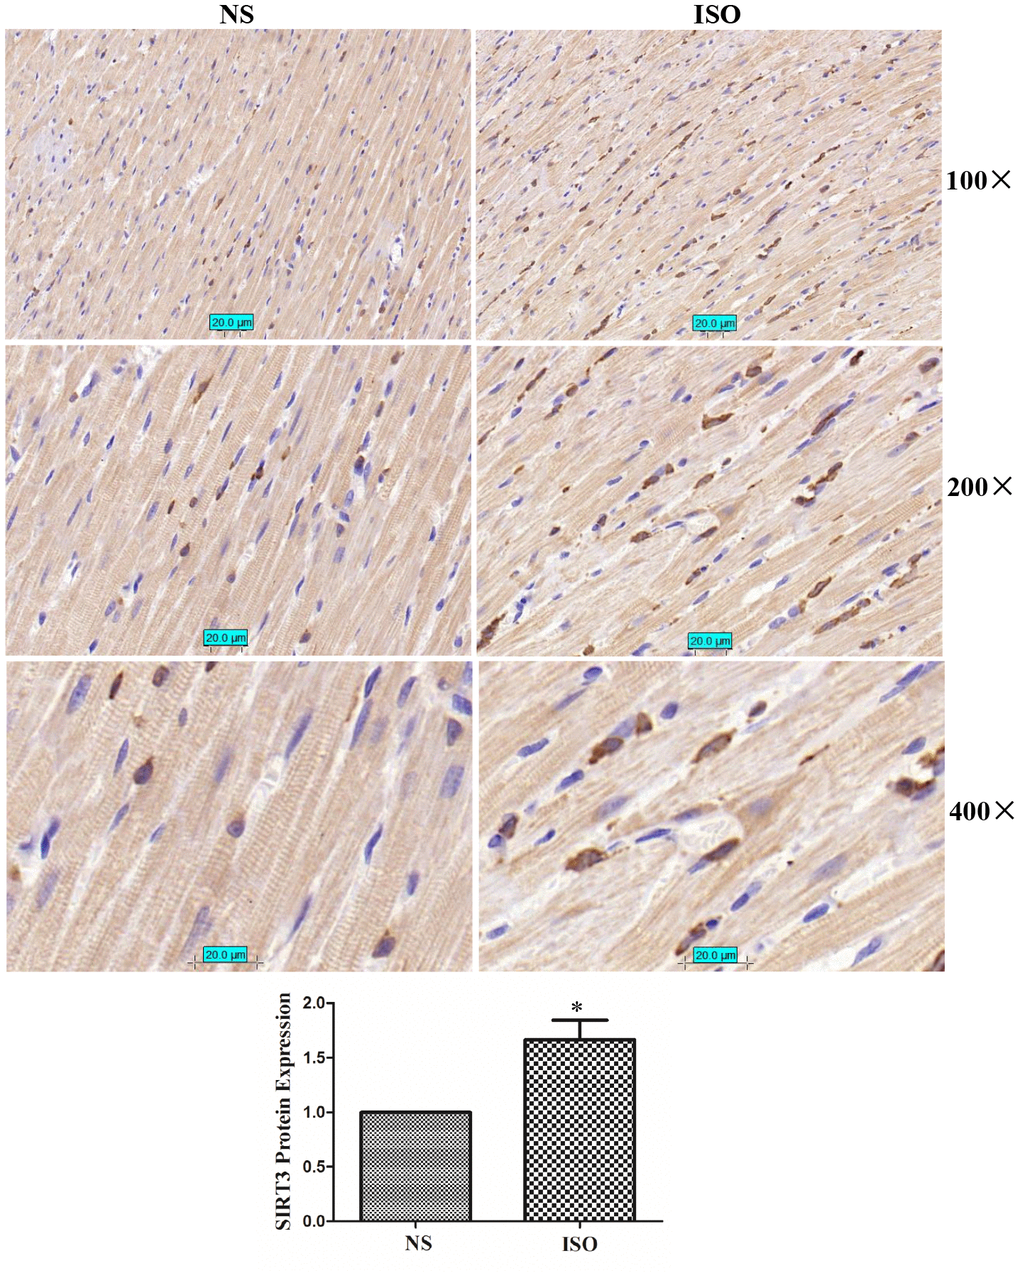 SIRT3 protein immunohistochemistry in rat heart tissues of NS group and ISO group. SD rats of ISO group were subjected to subcutaneous injections of 1.5 mg/kg/d isoproterenol for 7 d. The control group was given the same dose of saline. We stained SIRT3 protein with SIRT3 antibody and stained the nuclear with DAPI. Brown represents SIRT3 protein and blue represents nuclear. Representative images out of 4 independent experiments were shown.